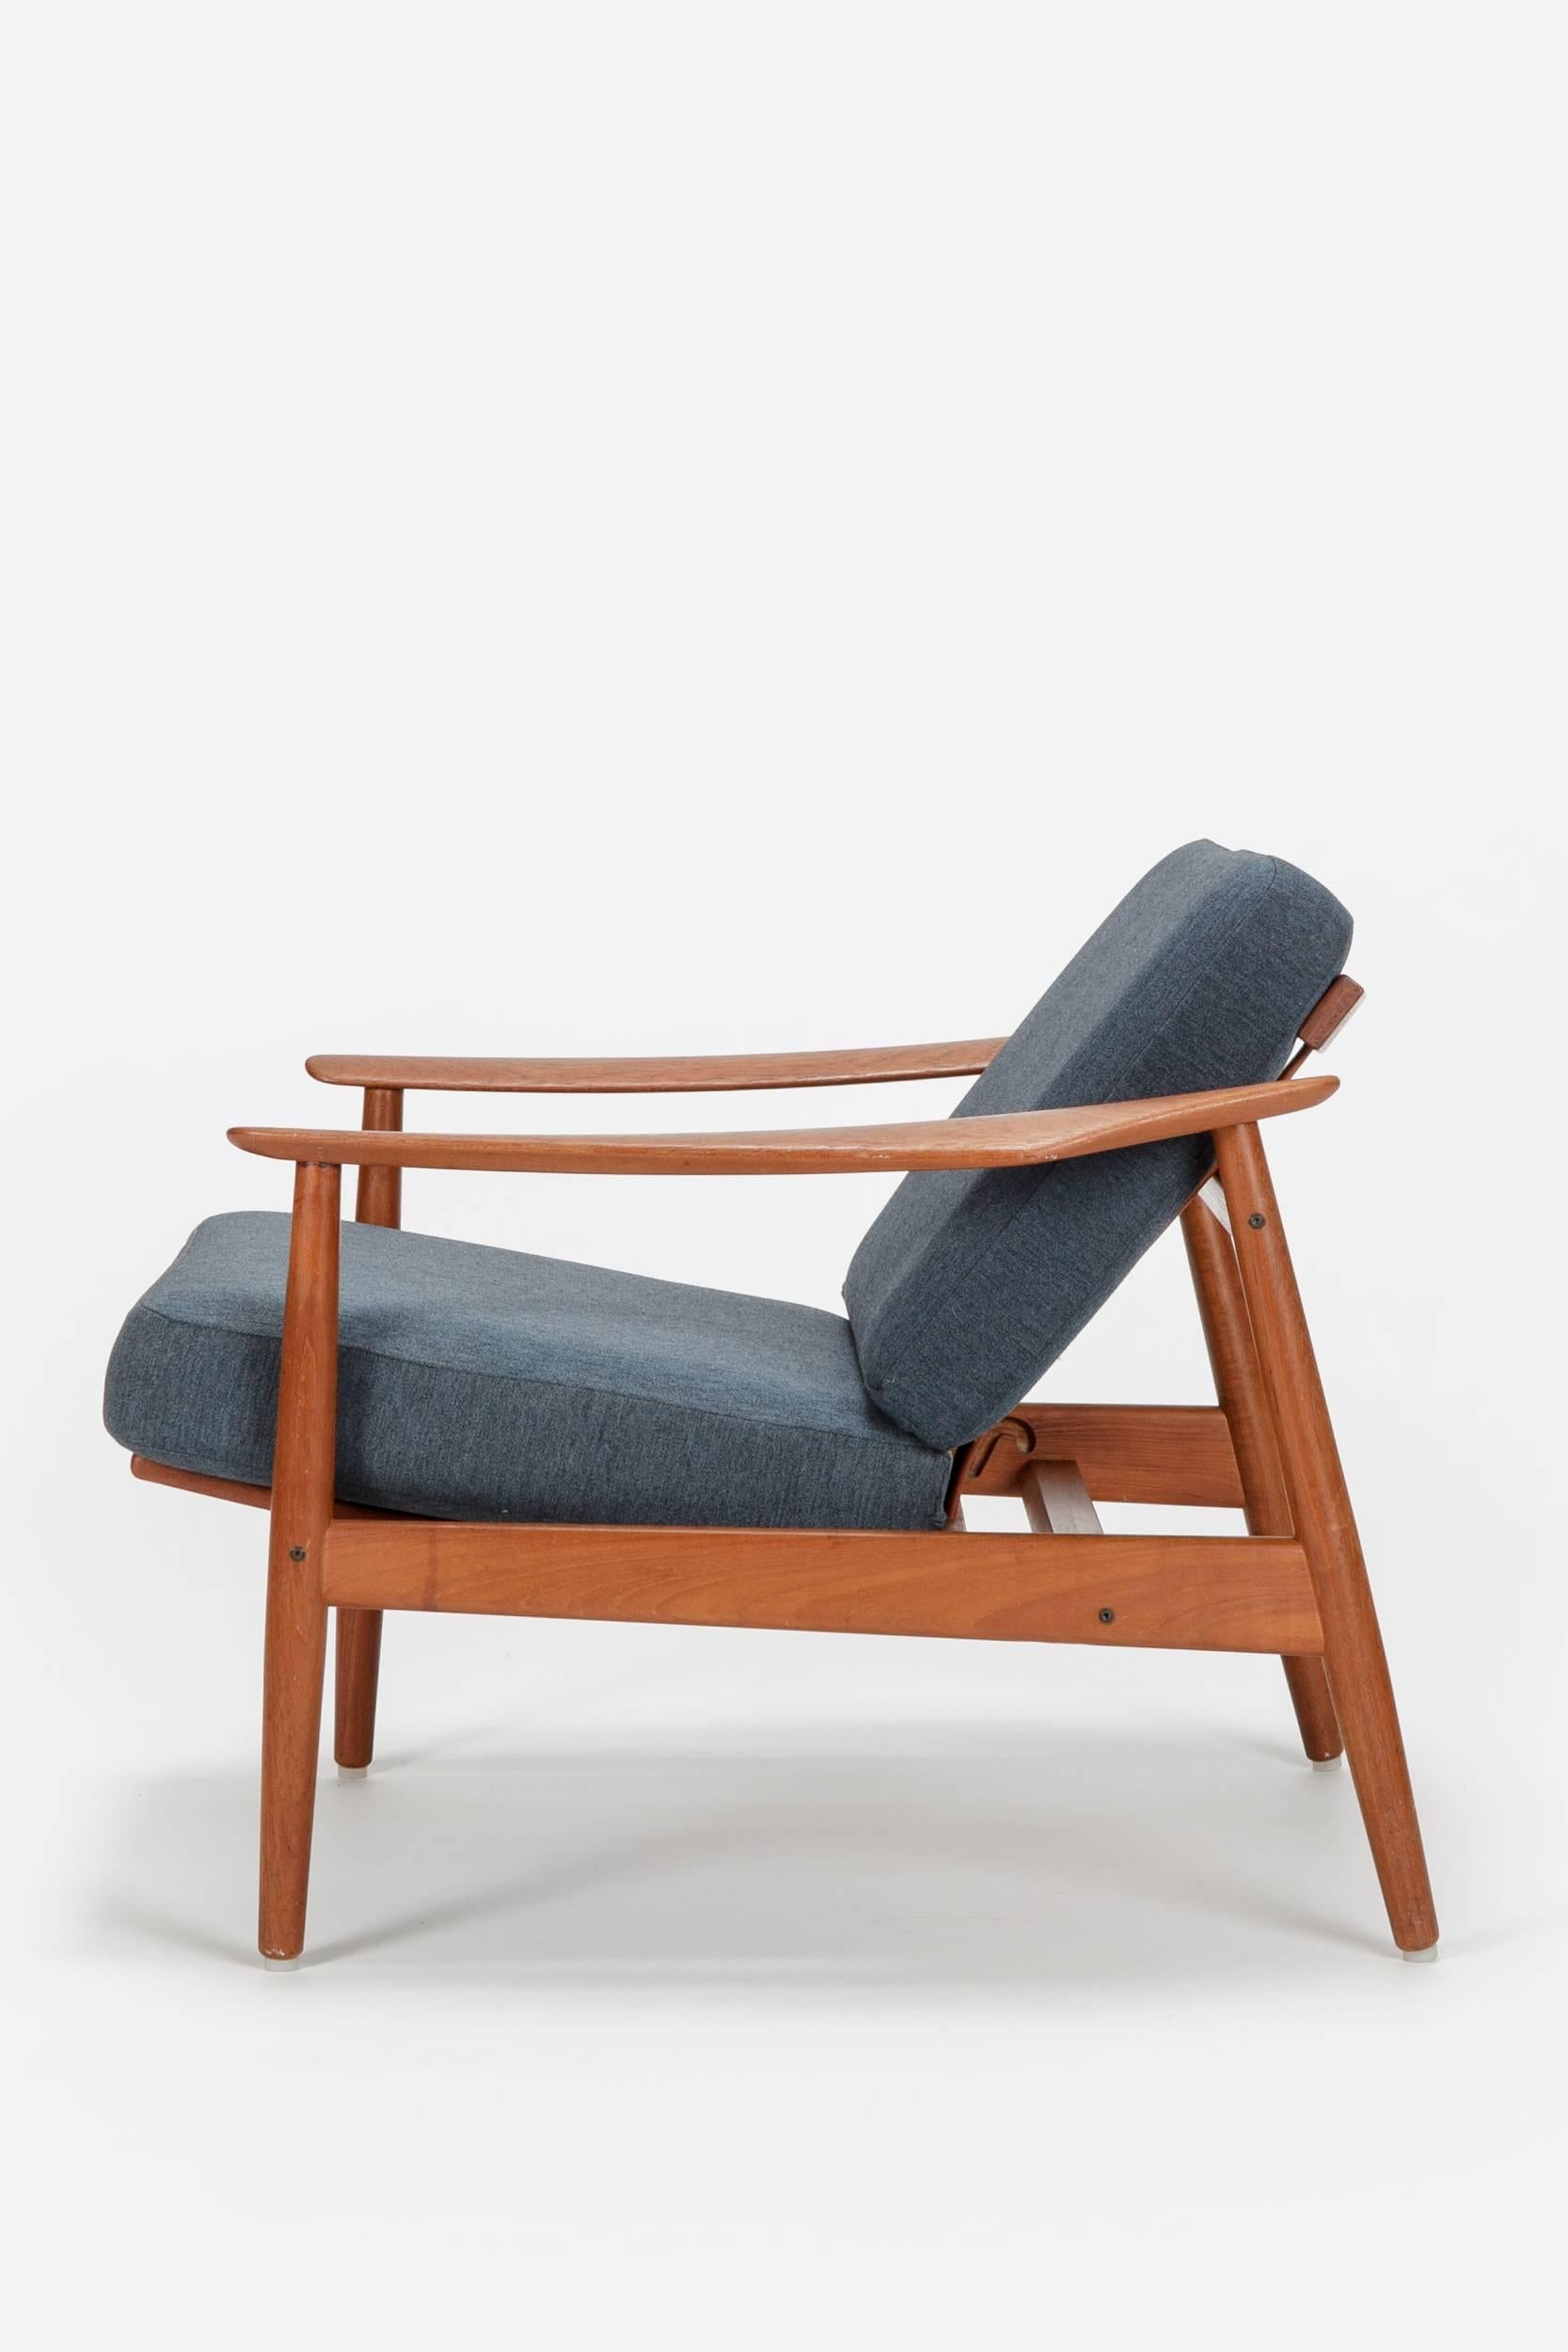 Arne Vodder easy chair model 164 for France & Son, manufactured in the 1960s in Denmark. The position of the back is adjustable. All parts are in their original condition, original springs cushions and cover. The frame was slightly refurbished, the